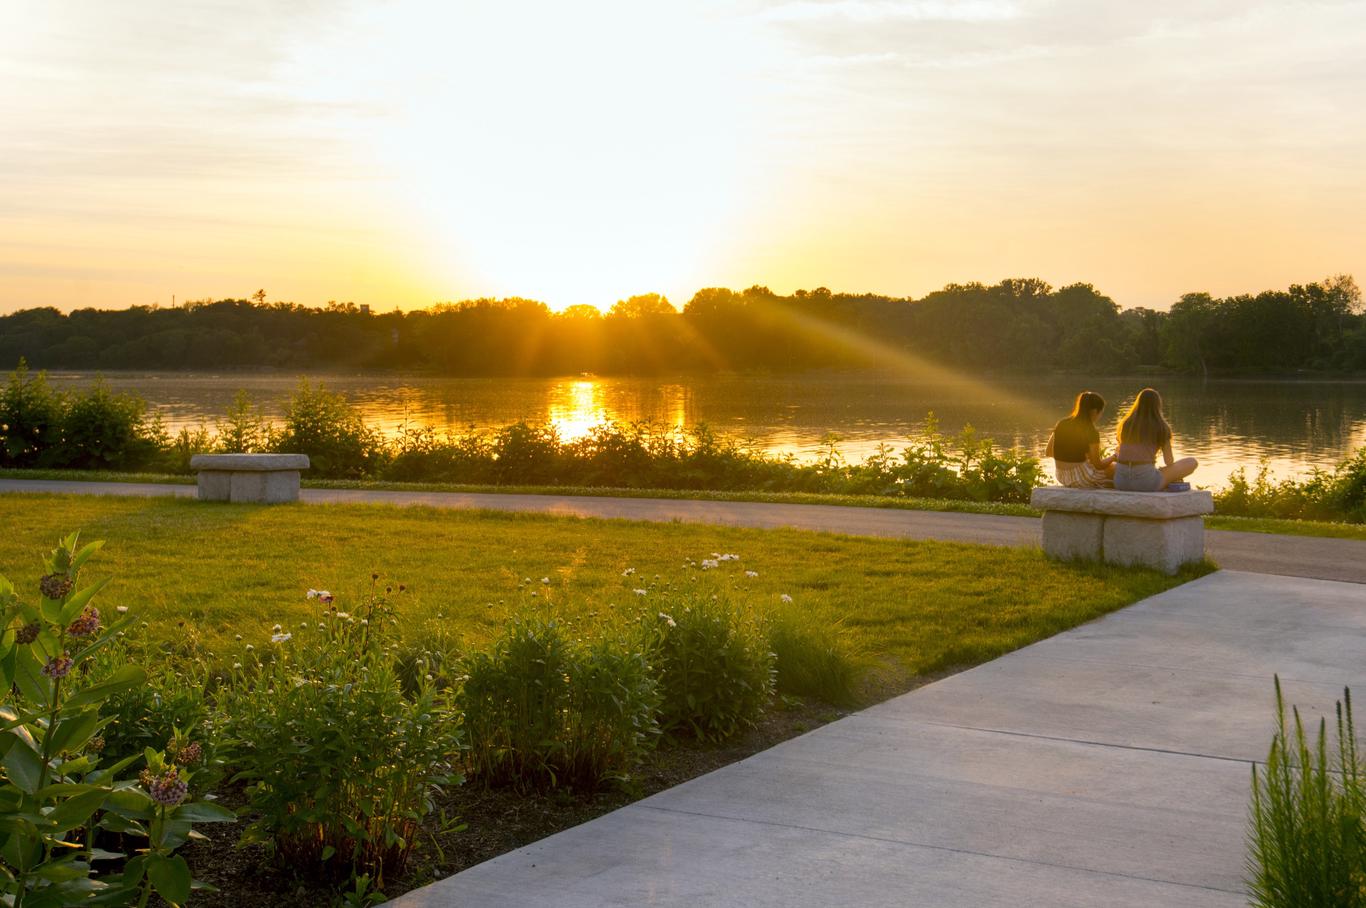 Young women watching the sunset at Perrysburg's multi-level riverfront park pathways that echo the river.